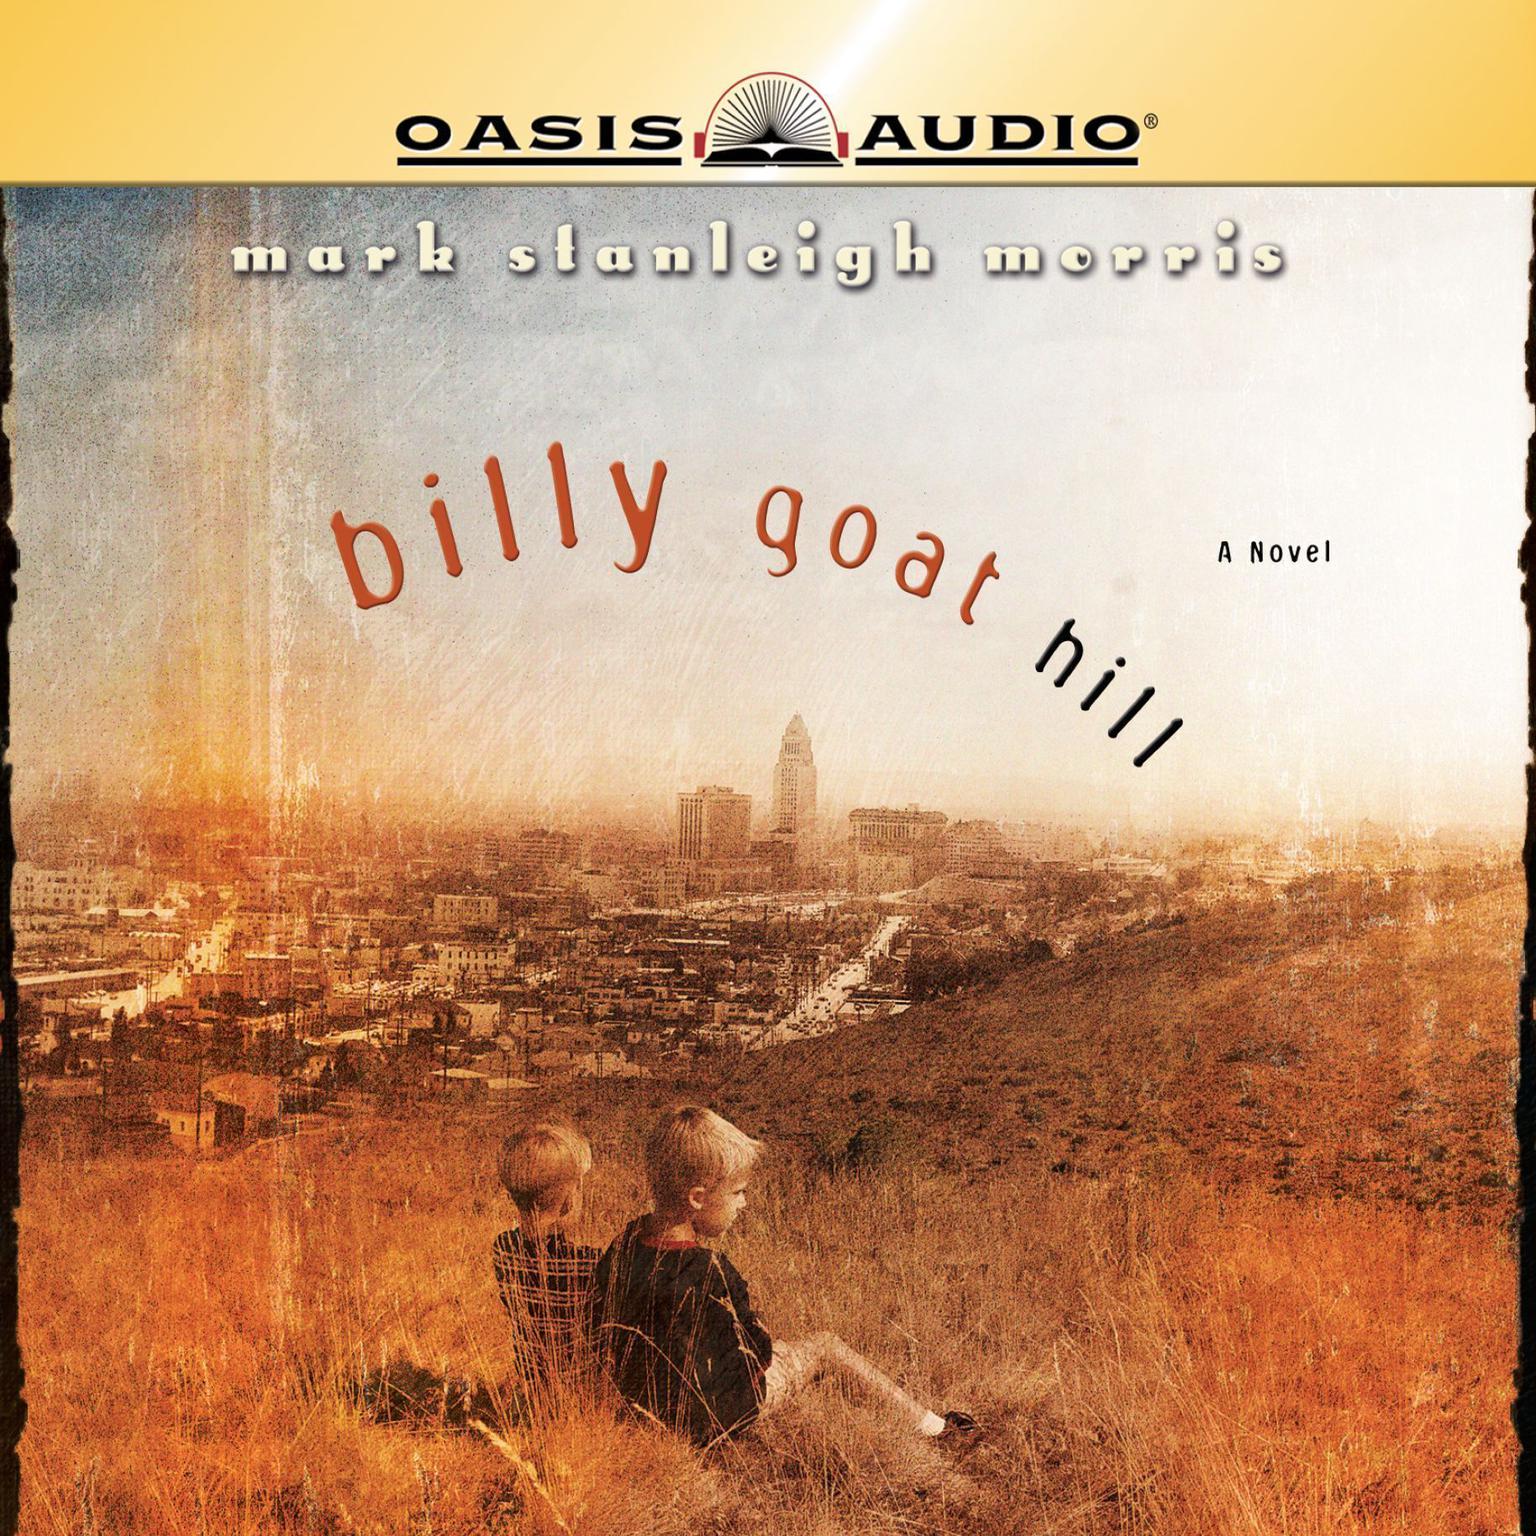 Billy Goat Hill (Abridged) Audiobook, by Mark Stanleigh Morris